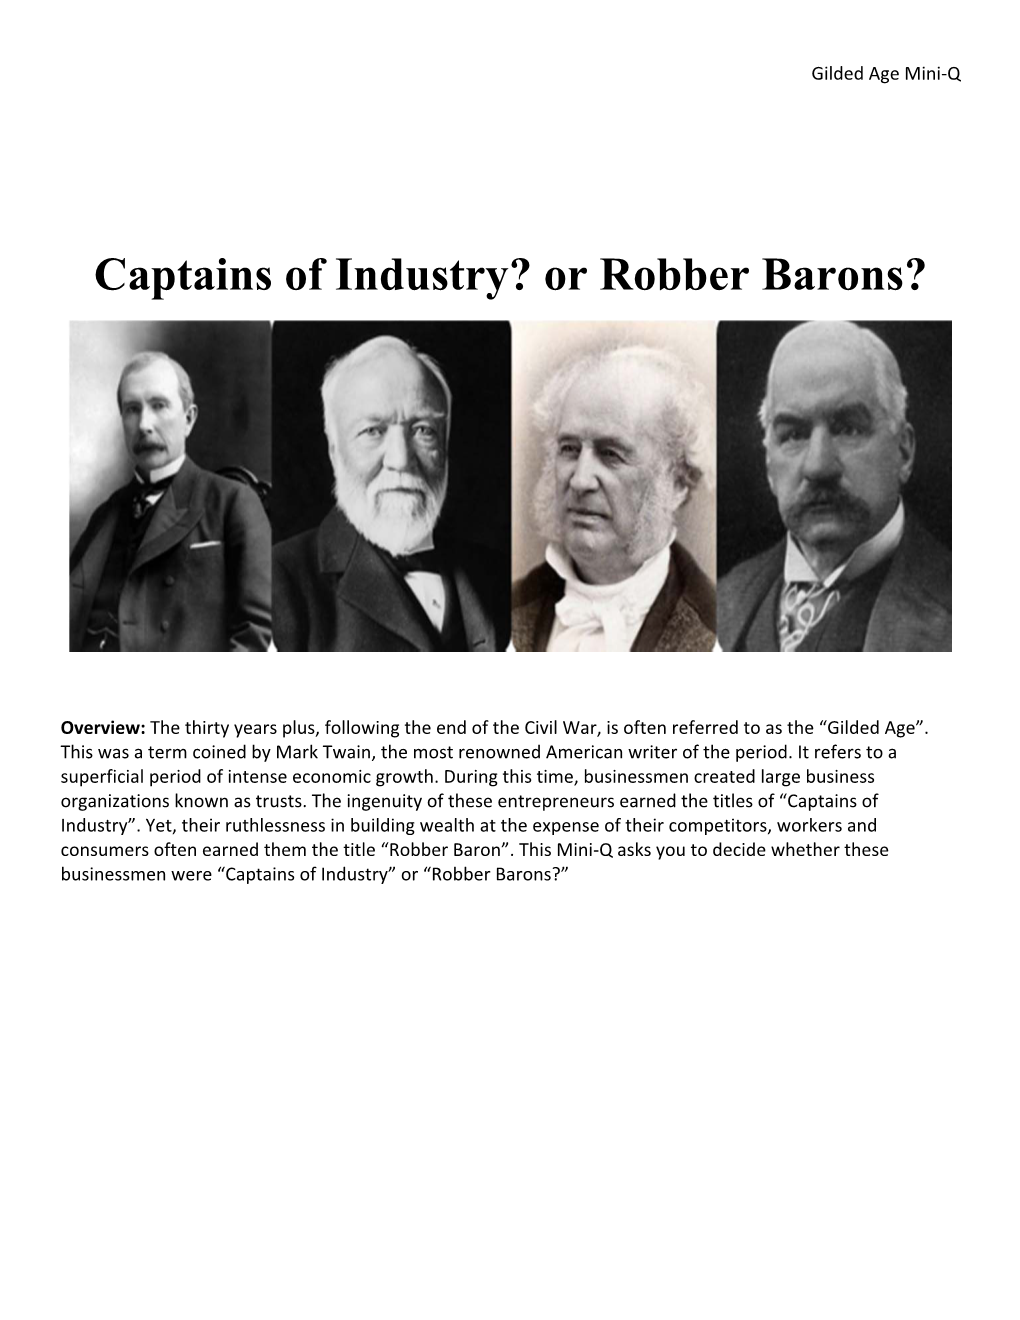 Captains of Industry? Or Robber Barons?